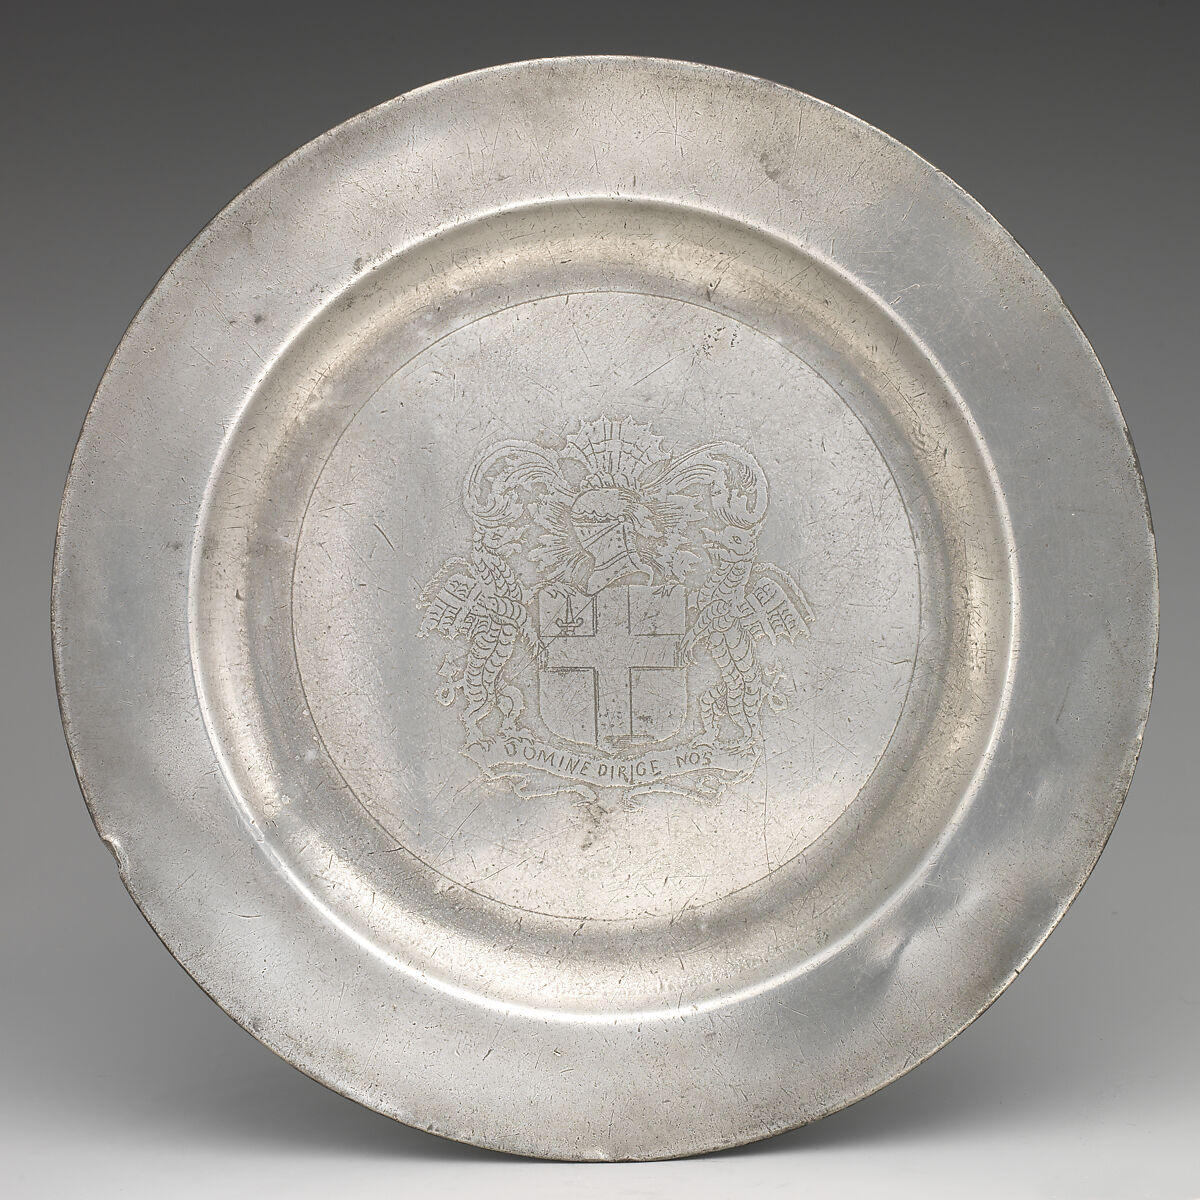 Plate with the arms of the City of London, Possibly John Duncombe (active Birmingham, 1718-1745), Pewter, British 